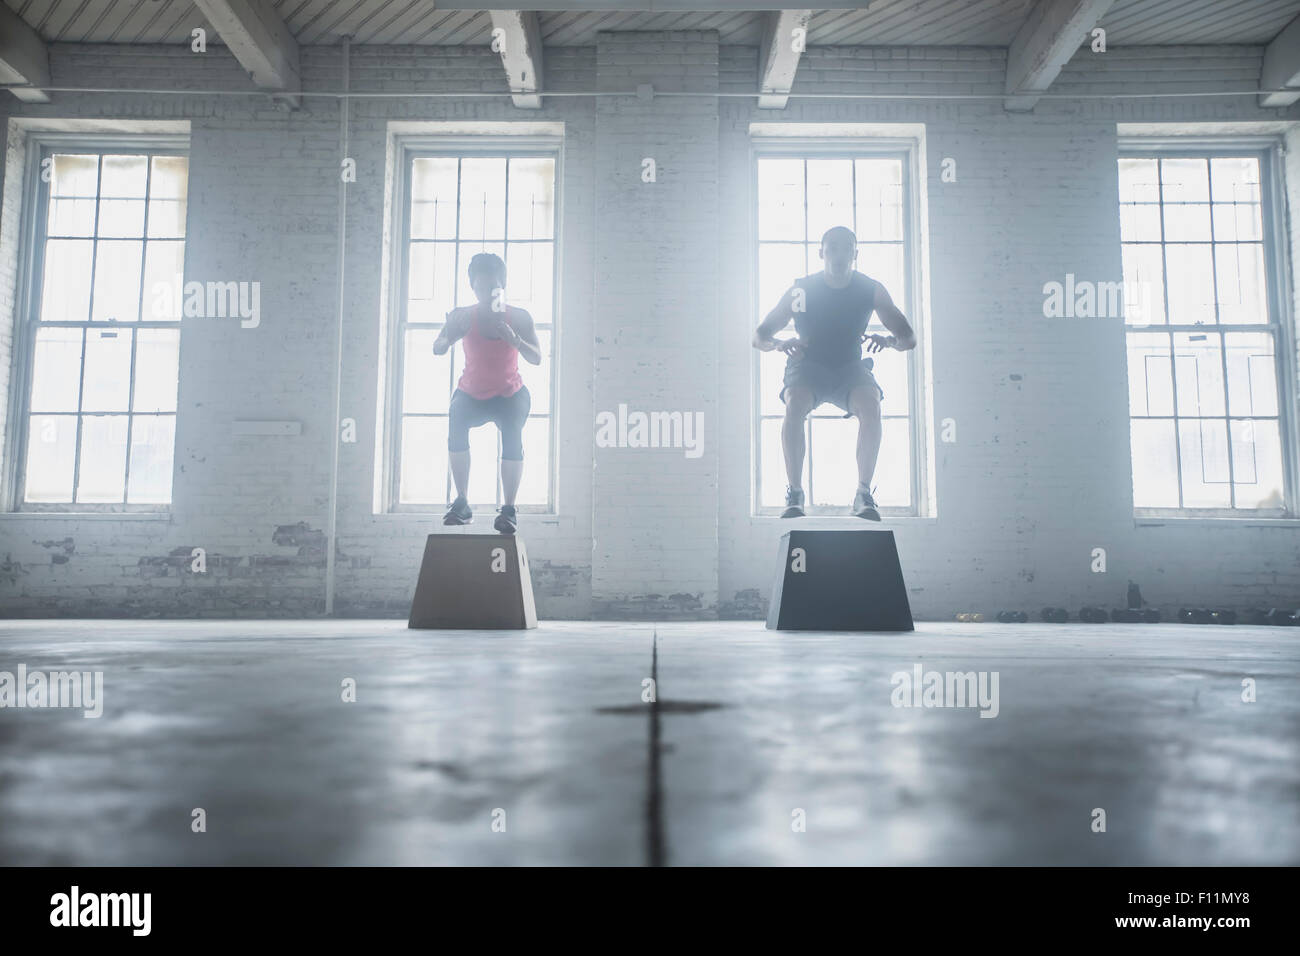 Silhouette of athletes jumping on platforms Stock Photo